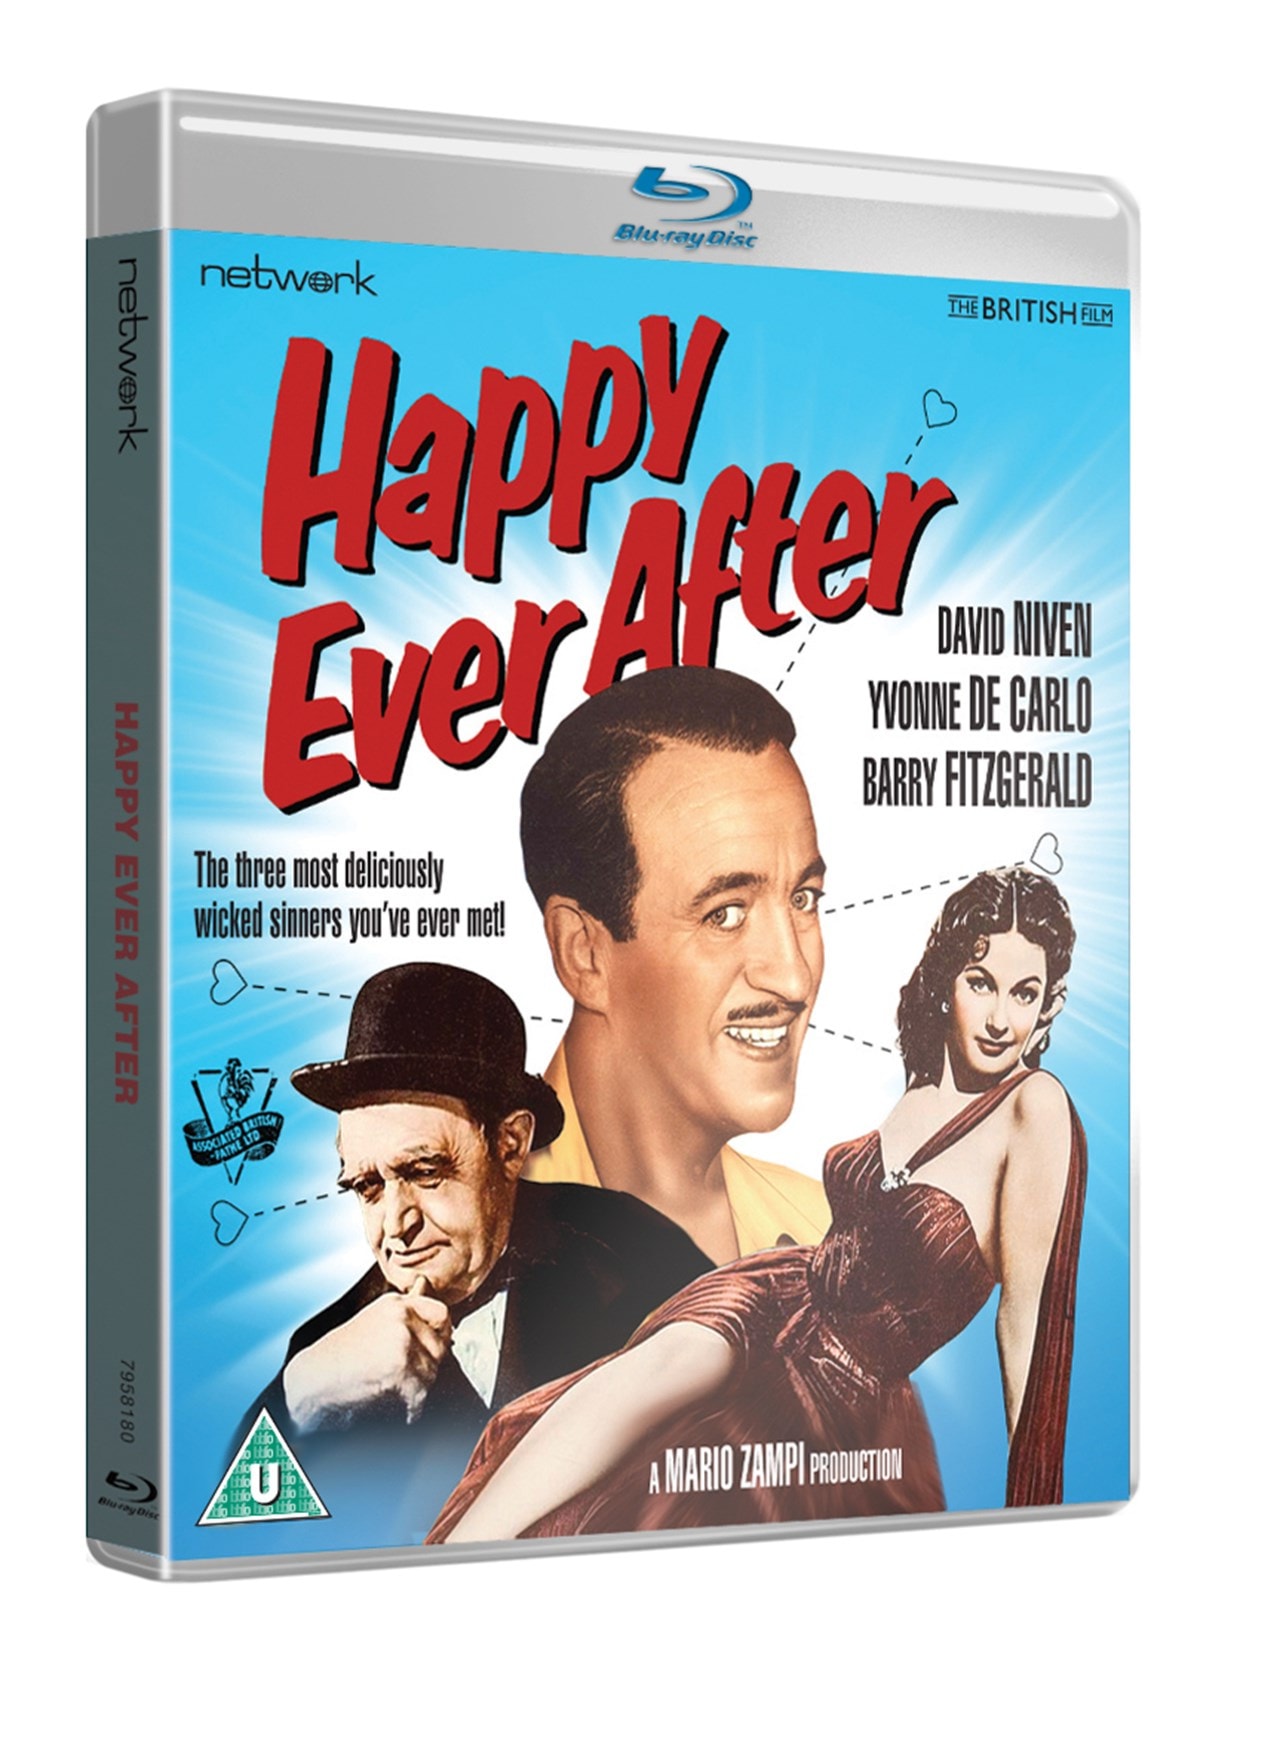 Happy Ever After | Blu-ray | Free shipping over £20 | HMV Store